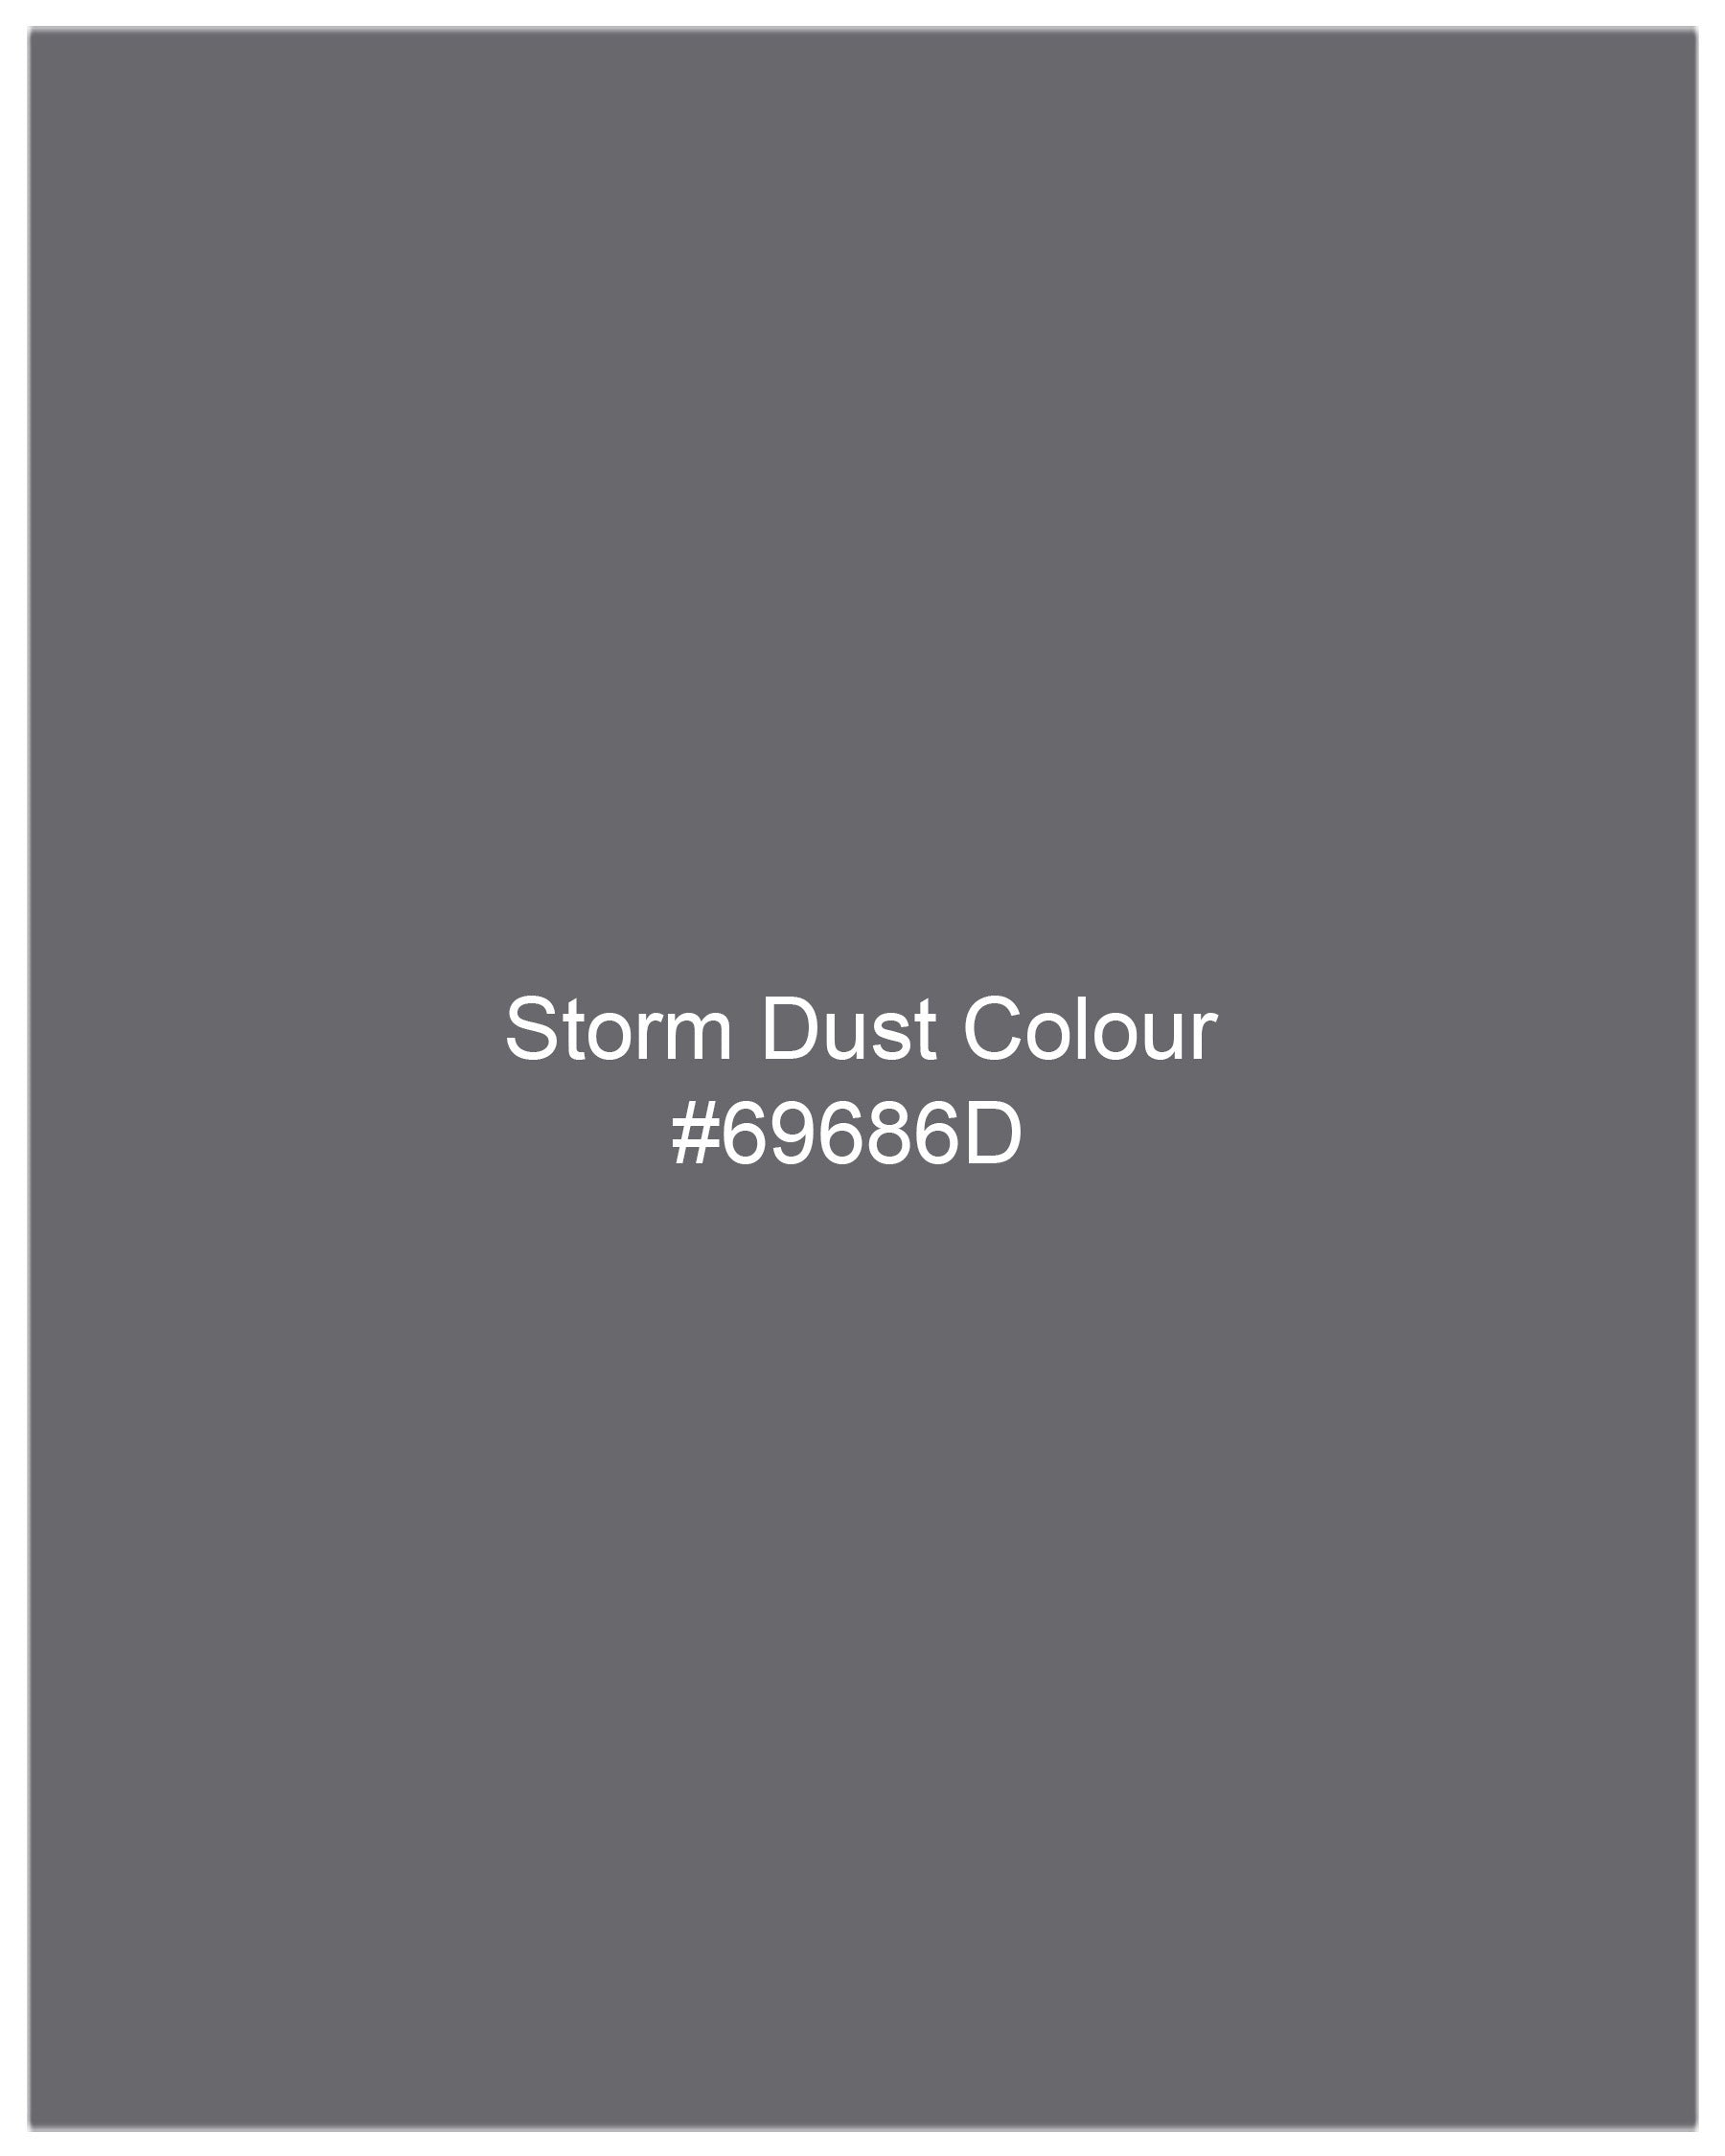 Storm Dust Gray Single Breasted Trench Coat With Pant TCPT2028-SB-PP-36, TCPT2028-SB-PP-38, TCPT2028-SB-PP-40, TCPT2028-SB-PP-42, TCPT2028-SB-PP-44, TCPT2028-SB-PP-46, TCPT2028-SB-PP-48, TCPT2028-SB-PP-50, TCPT2028-SB-PP-52, TCPT2028-SB-PP-54, TCPT2028-SB-PP-56, TCPT2028-SB-PP-58, TCPT2028-SB-PP-60